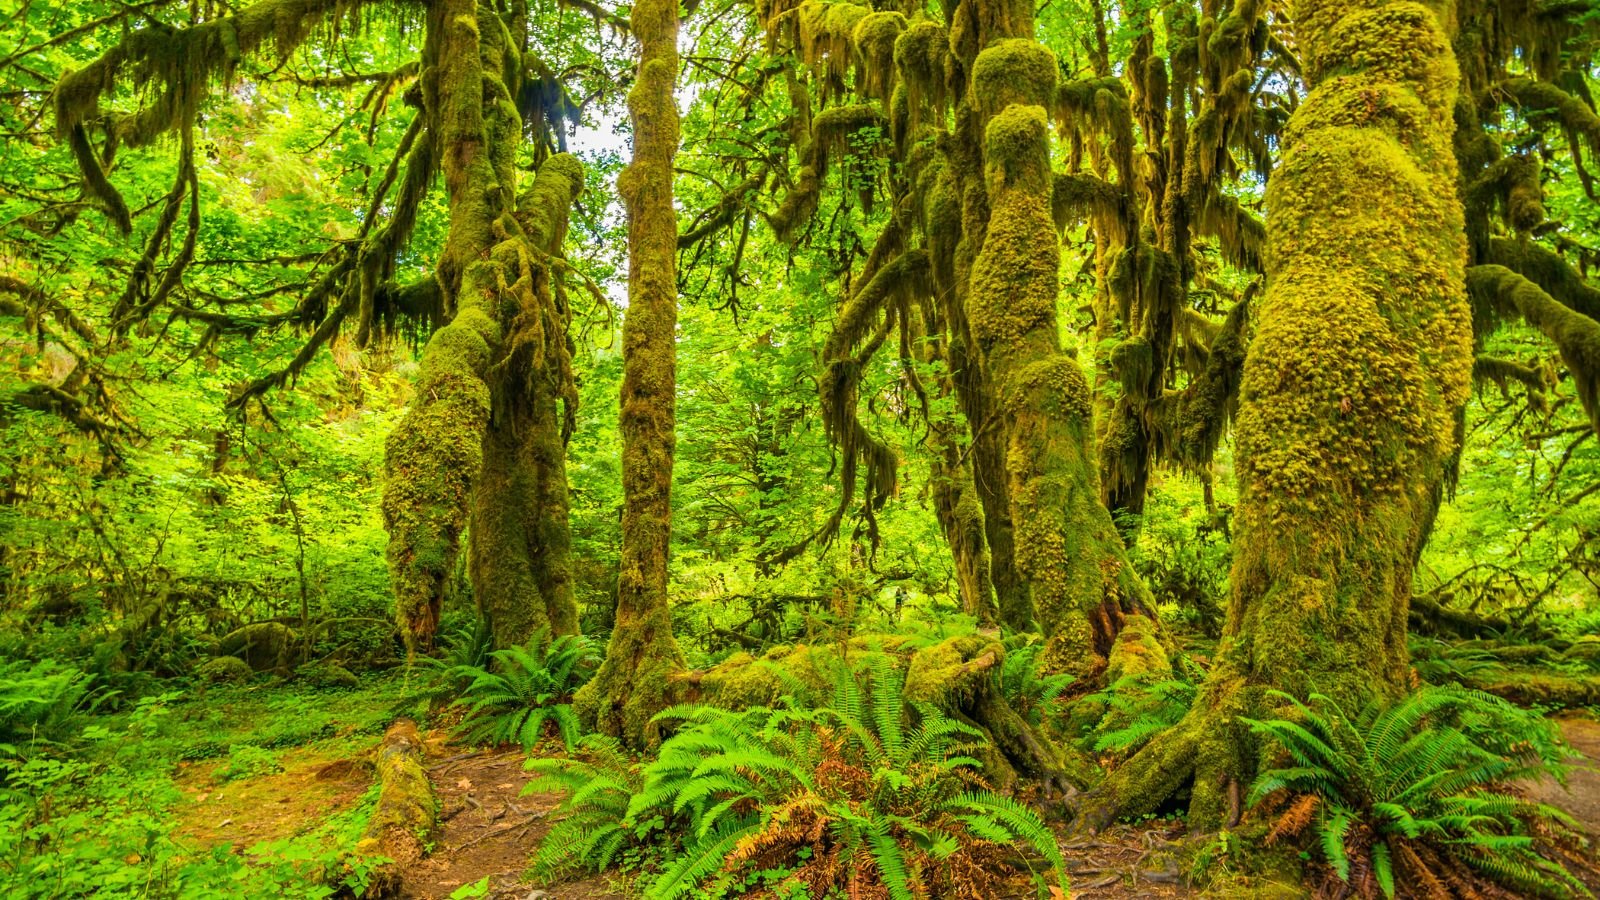 <p>The Hoh Rain Forest located in Olympic National Park, Washington, is one of the rare rainforests within the United States. It’s known for its moss-covered trees and peaceful environment. Gordon Hempton has identified the Hoh River Valley as home to the quietest place in the contiguous 48 states It is devoid of urban noise and human activity.</p>